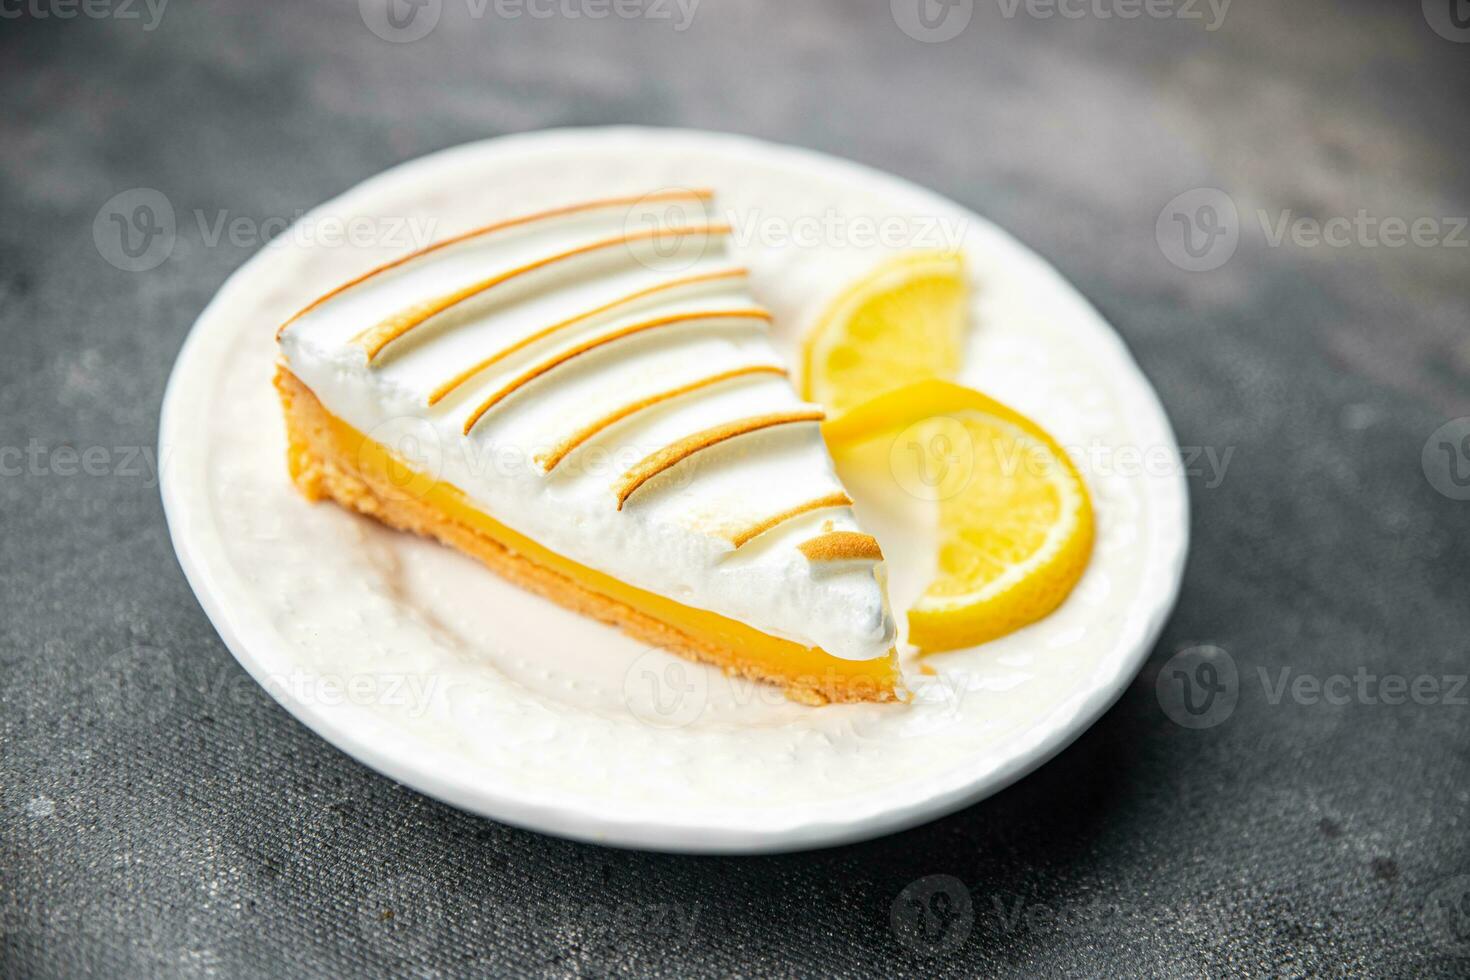 sweet lemon tart meringue dessert ready to eat meal food snack on the table copy space food background rustic top view photo